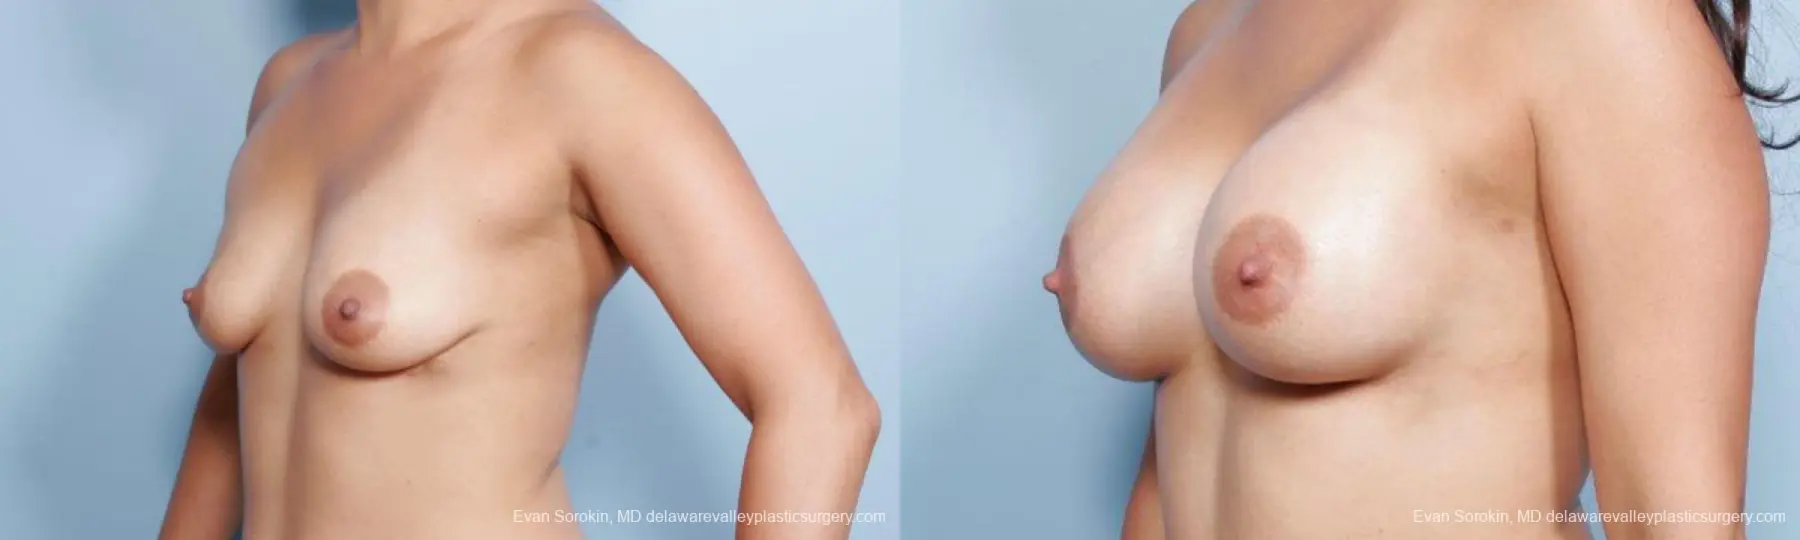 Philadelphia Breast Augmentation 9297 - Before and After 4